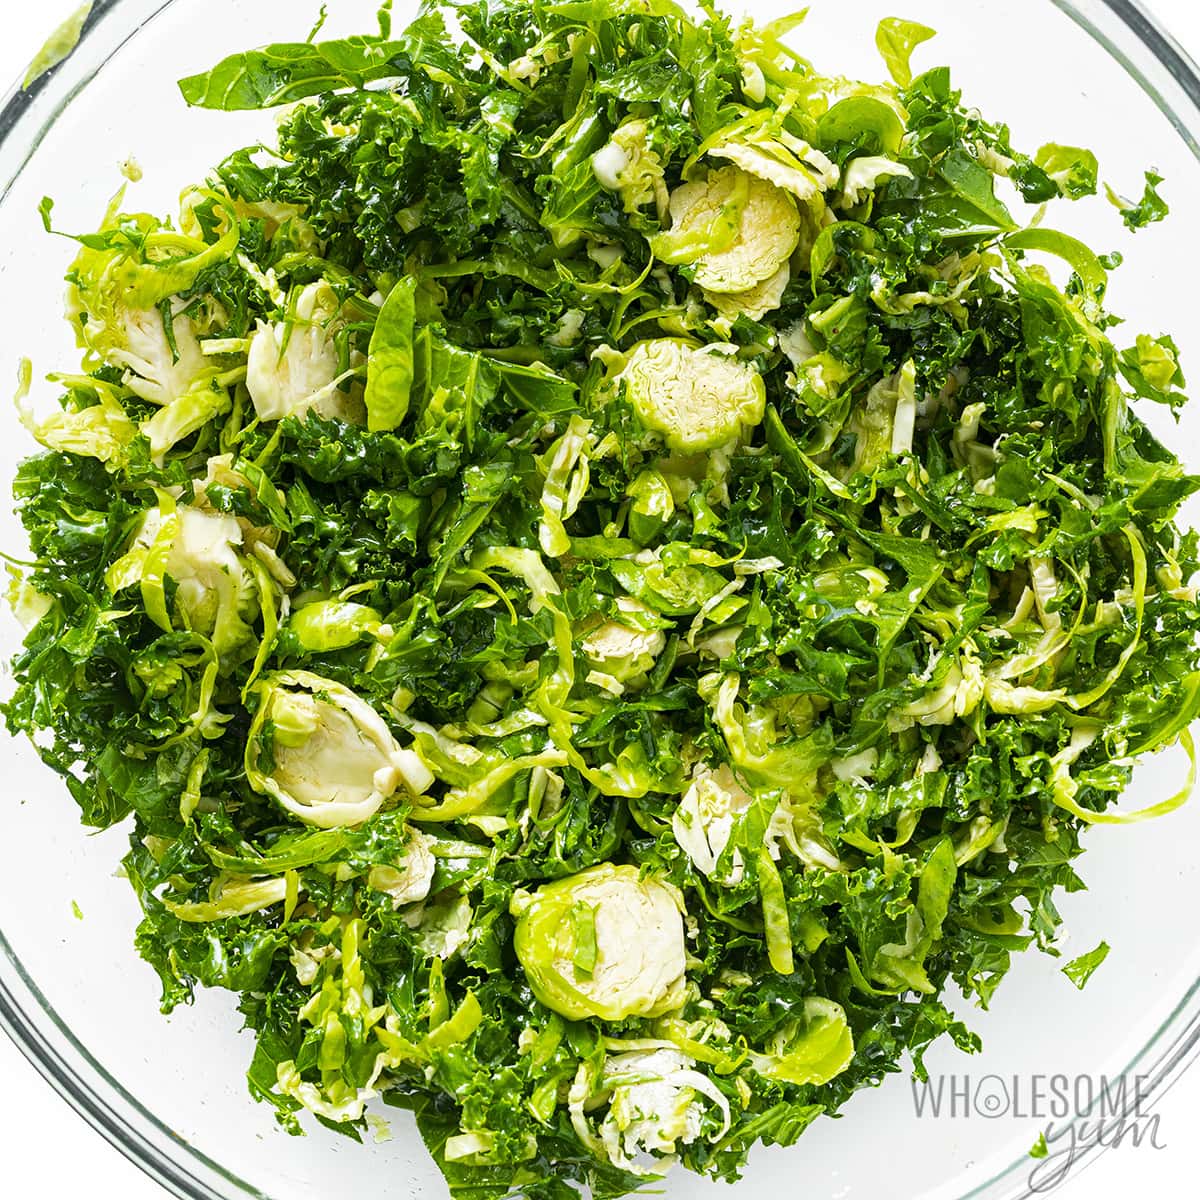 Shredded brussels sprouts and kale massaged with dressing.